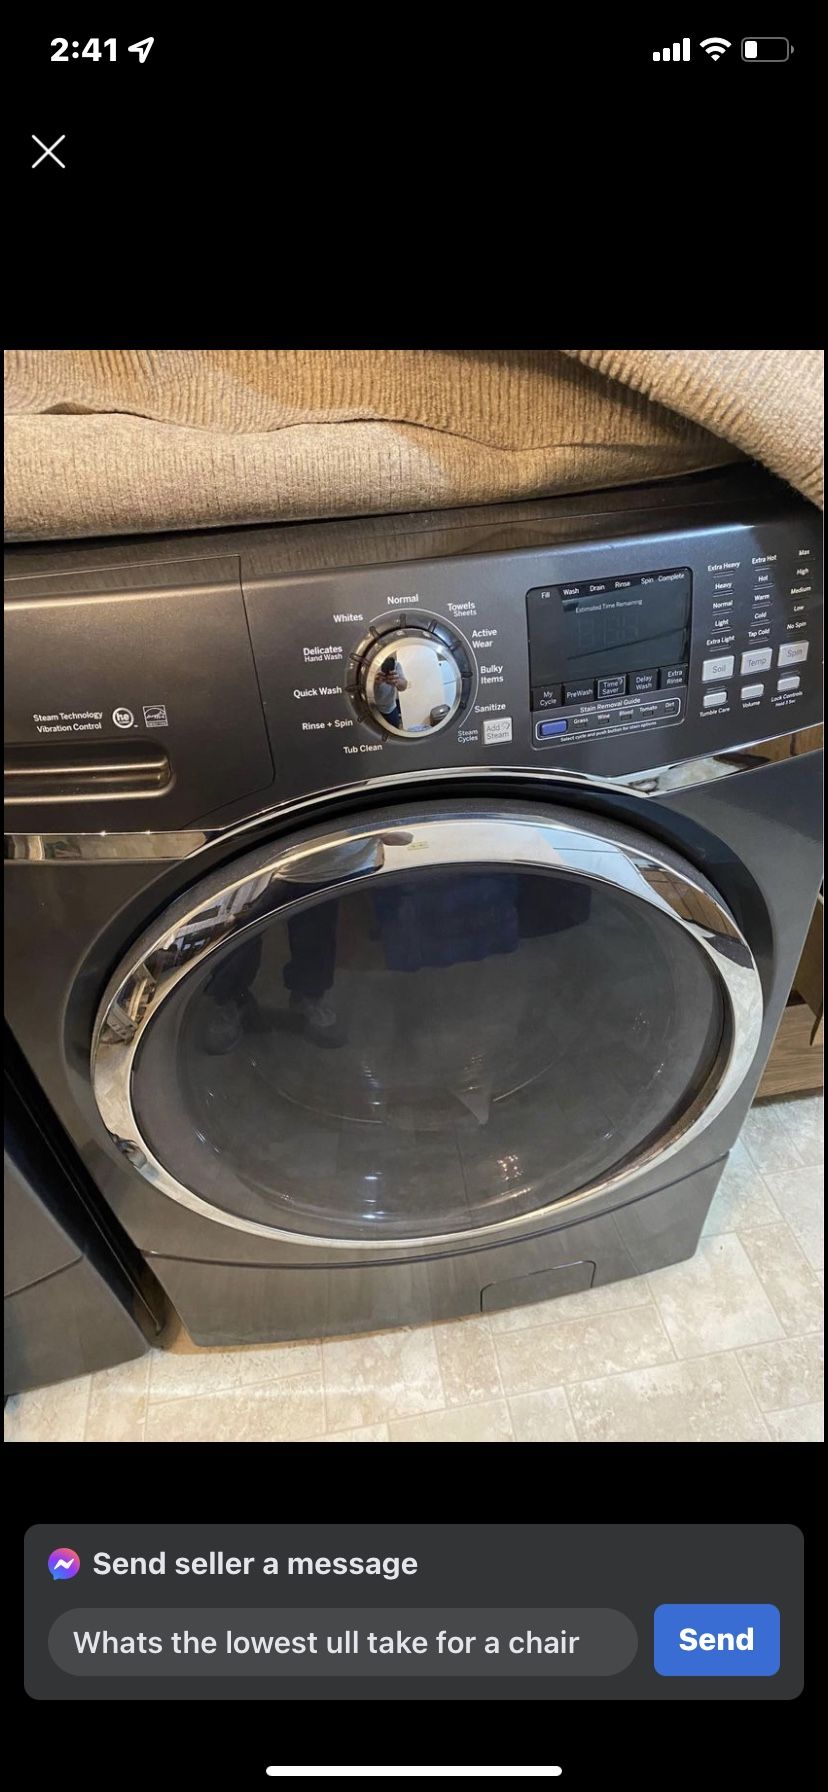 Set Washer And Dryer 